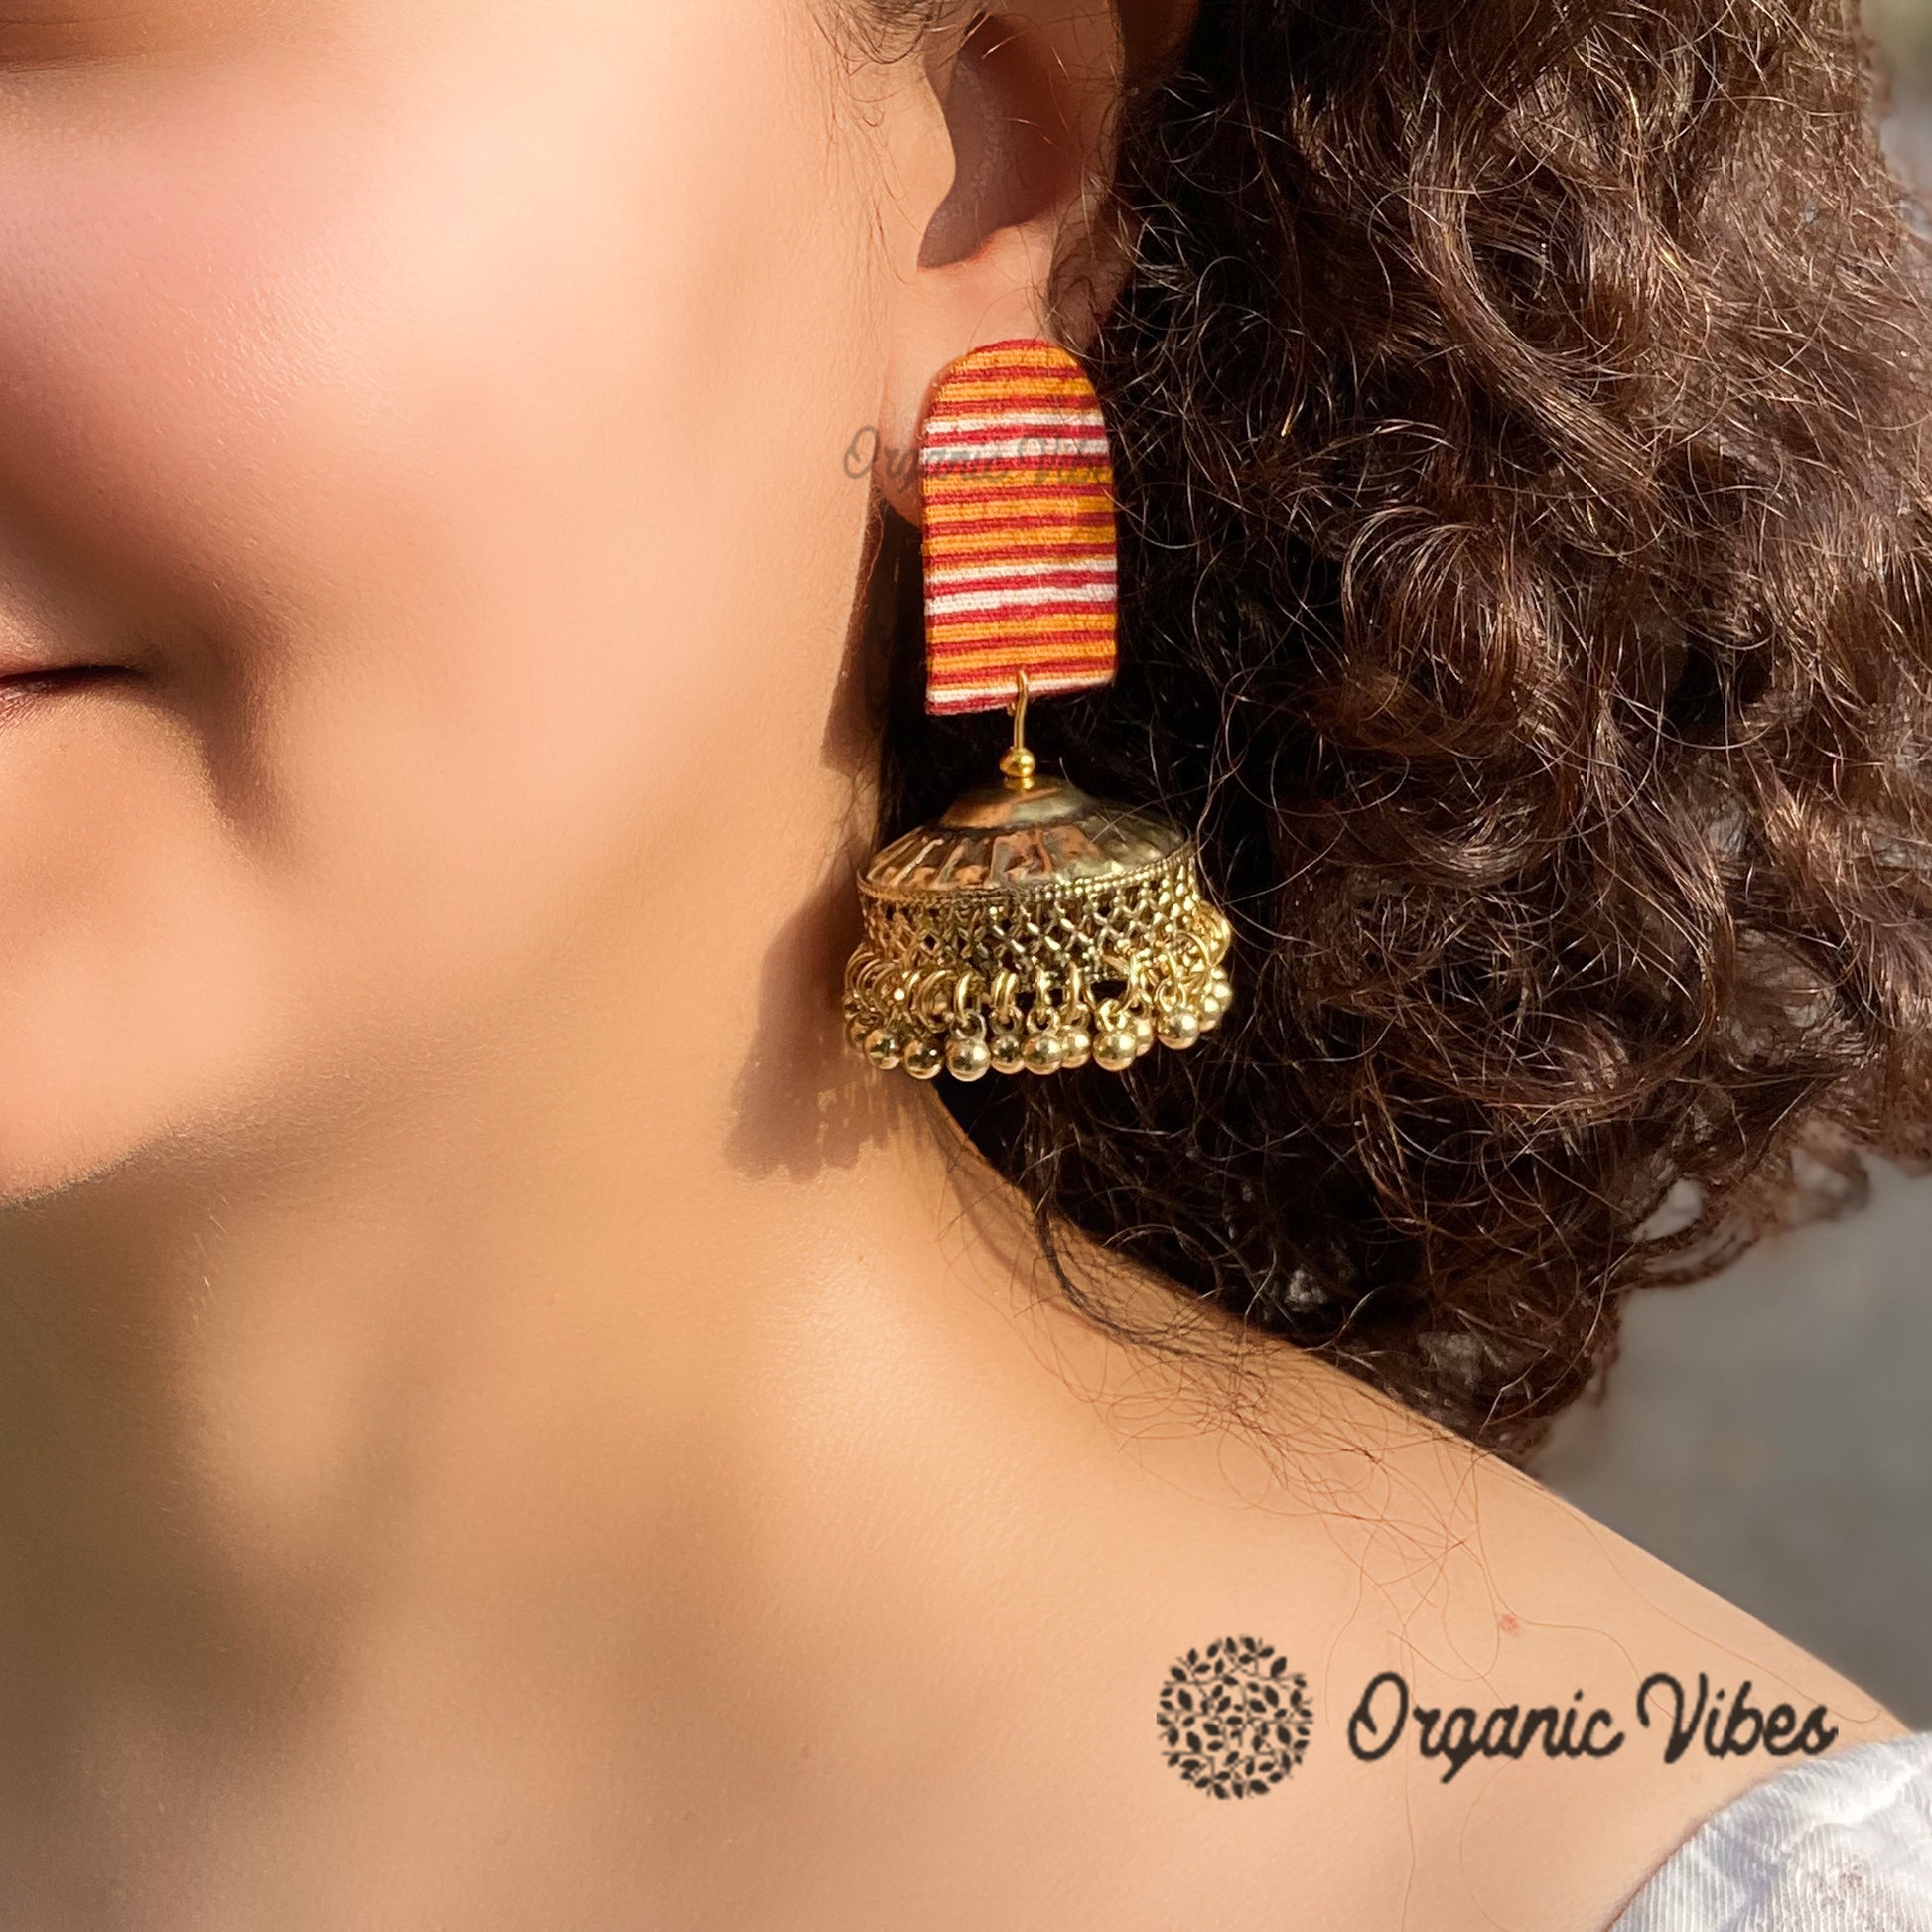 Organic Vibes Handmade Multi Colour Striped Fabric Studs With Golden Jhumka Earrings For Women